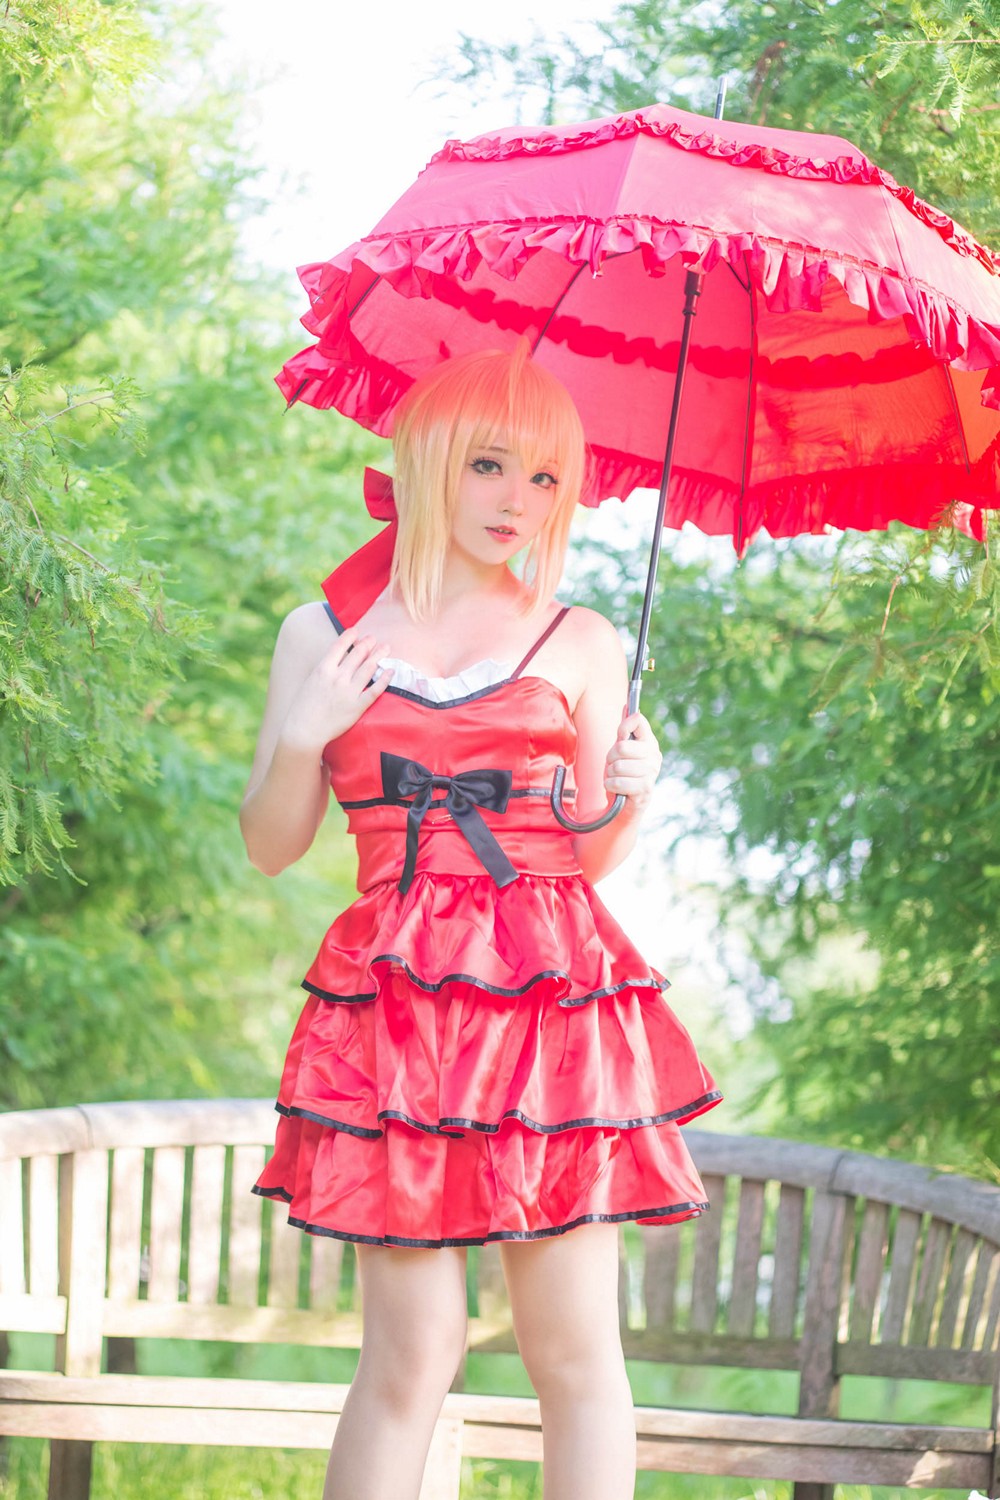 ChihiroxFate Nero - The Banquet of the tyrant Rom - COSPLAY -